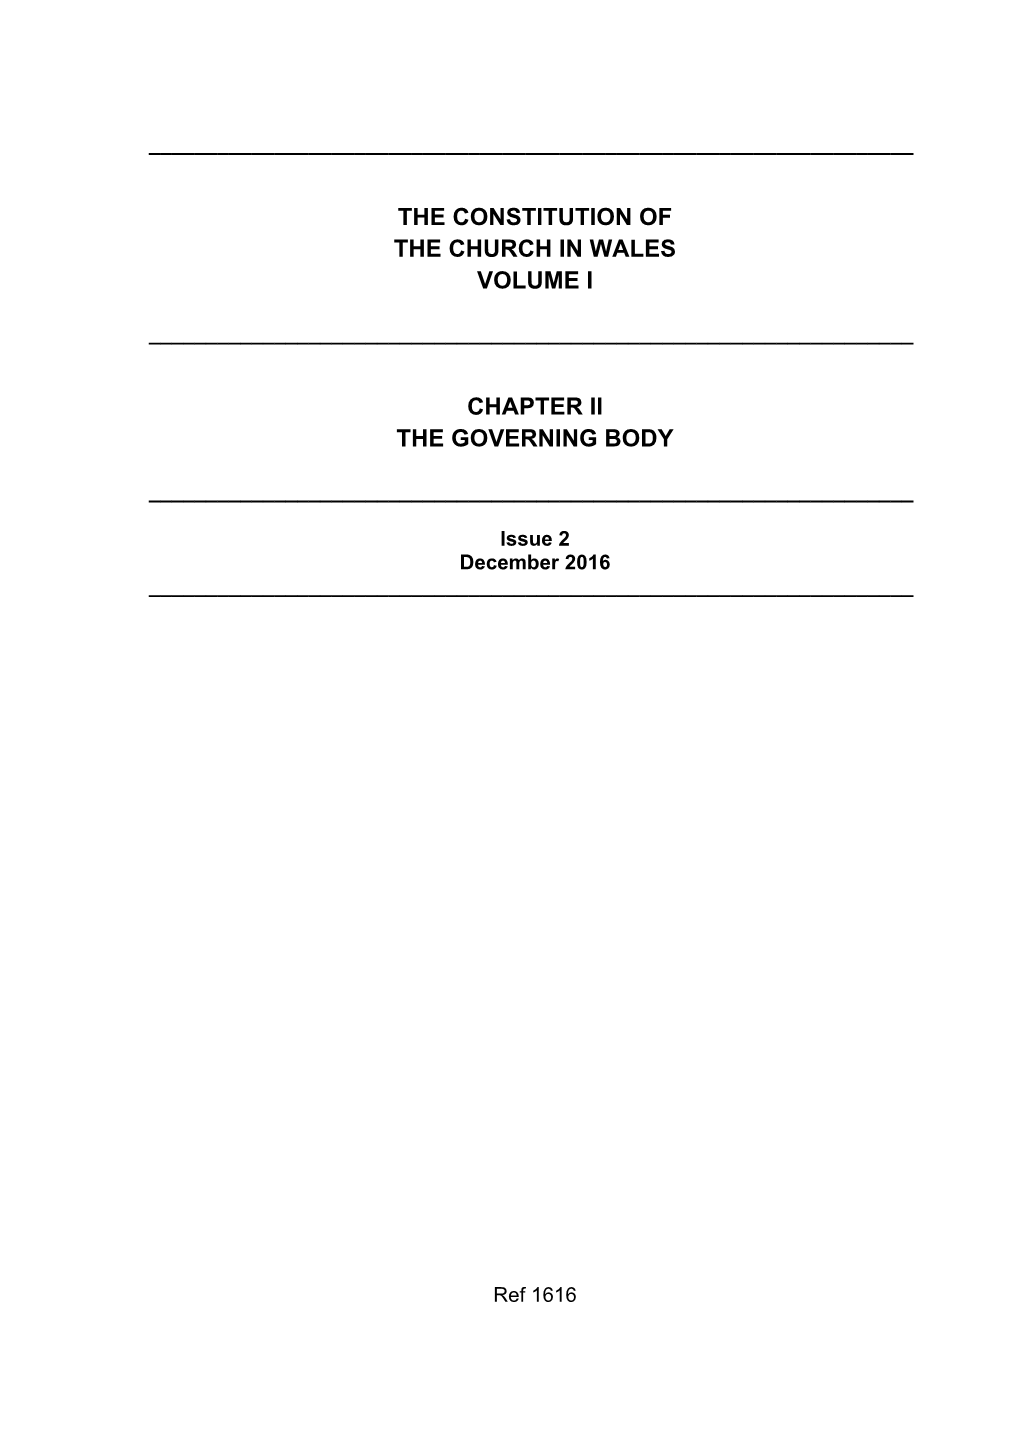 The Constitution of the Church in Wales Volume I